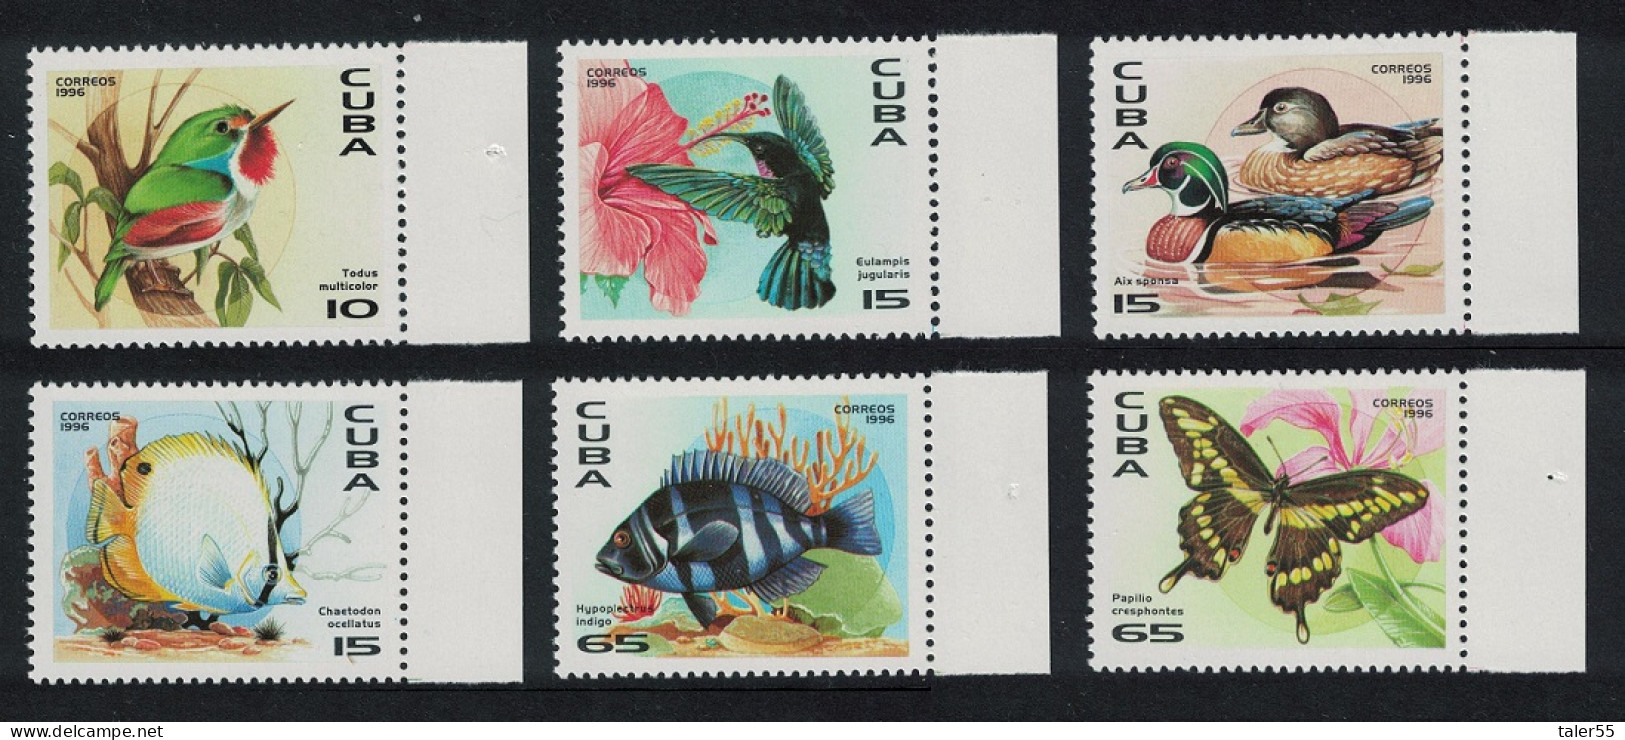 Caribic Birds Fish Butterfly 6v Margins 1996 MNH SG#4079-4084 - Unused Stamps